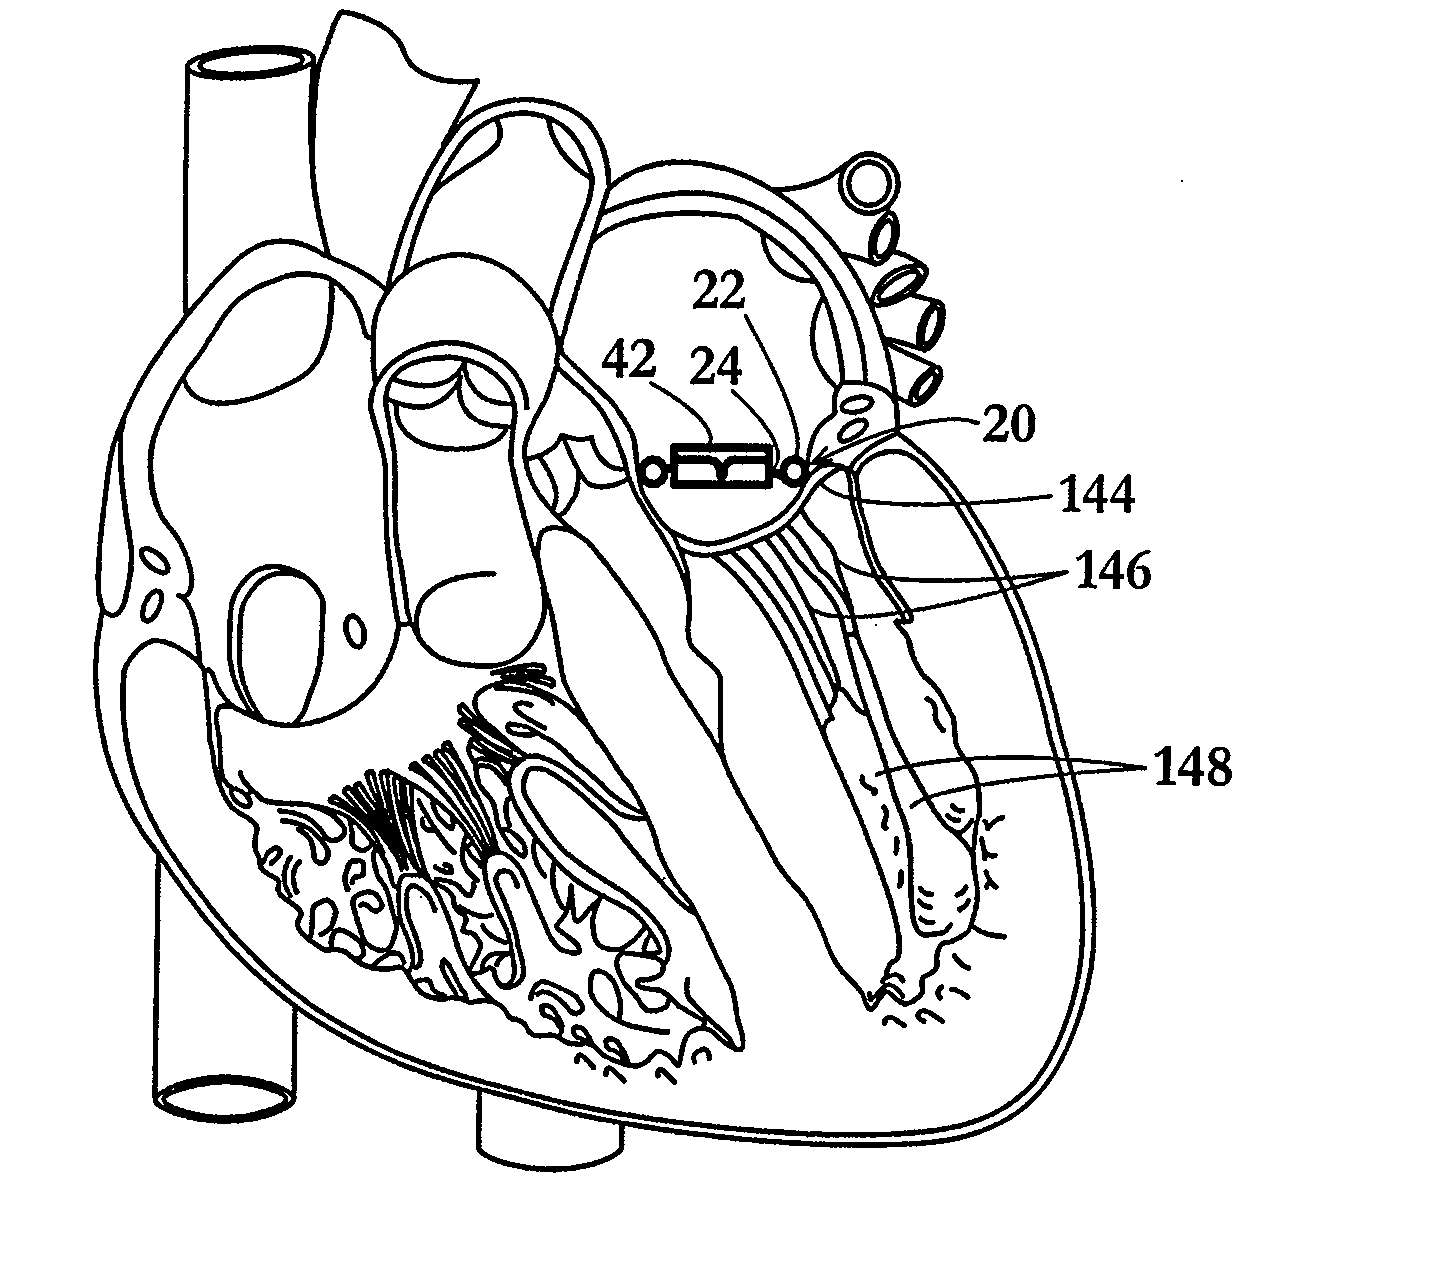 Device and method for temporary or permanent suspension of an implantable scaffolding containing an orifice for placement of a prosthetic or bio-prosthetic valve